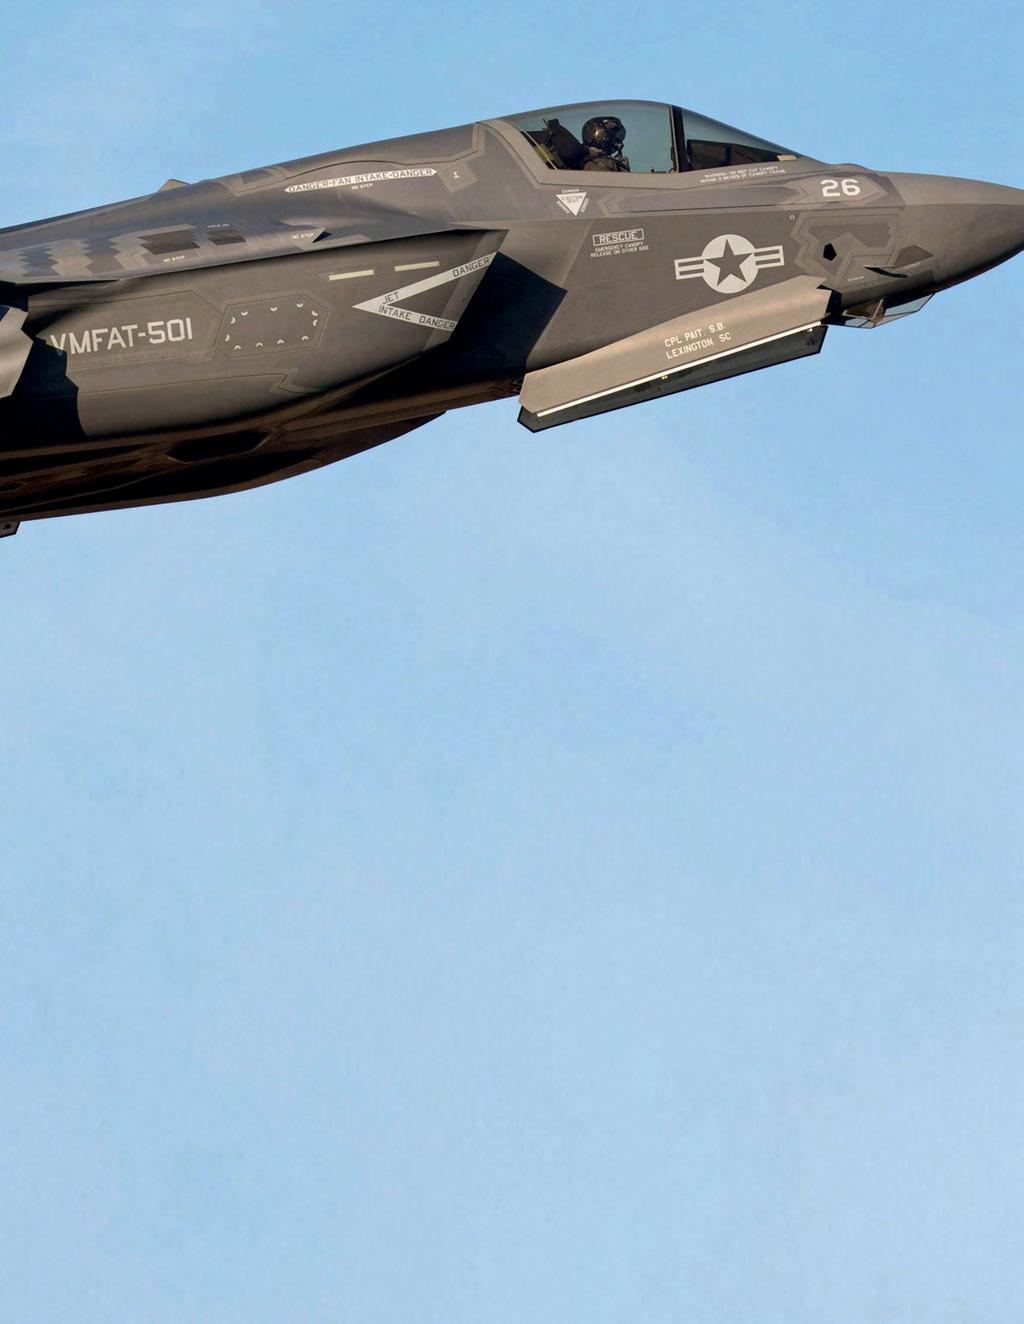 Top: The arrival of the F-35 at MCAS Beaufort has been generally welcomed in the area, but some local